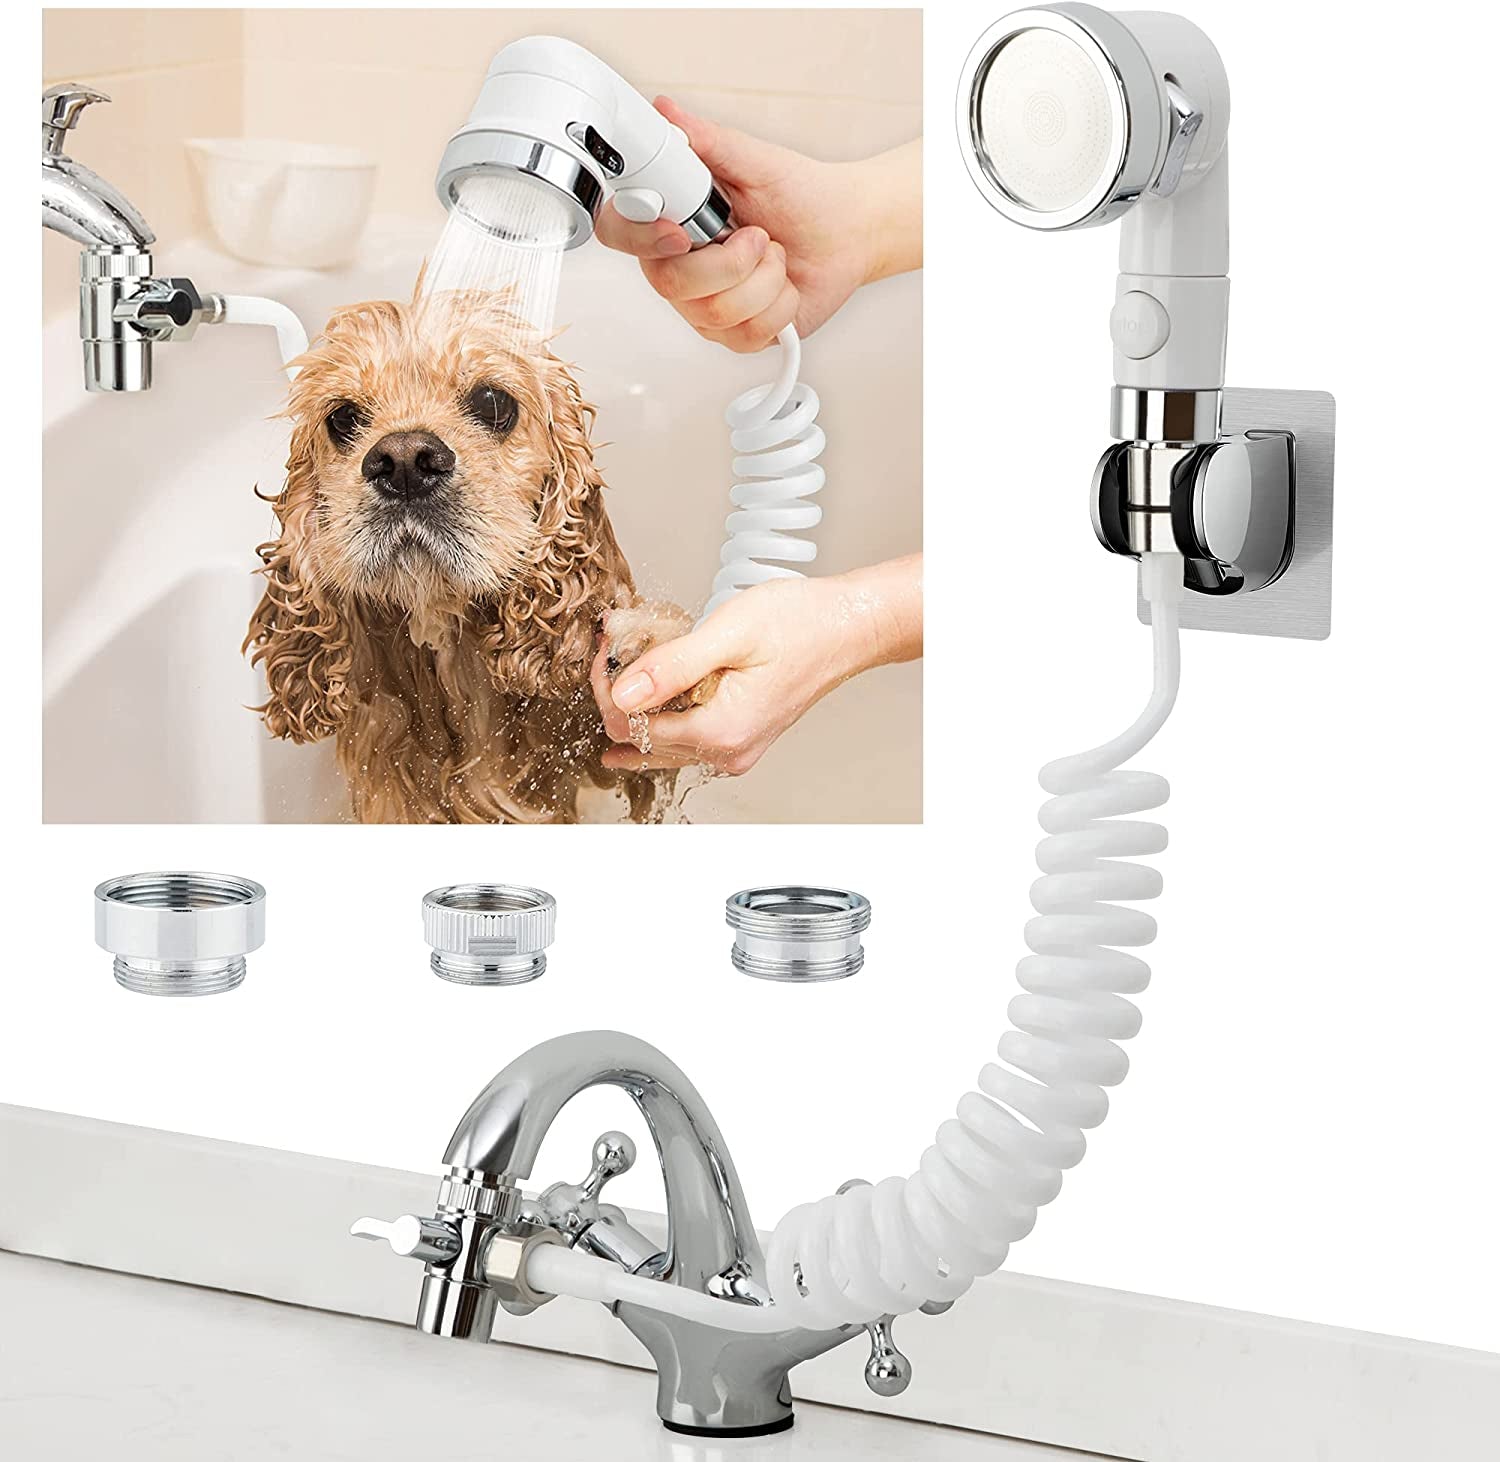 Versatile Sink Faucet Sprayer Attachment: Transform Your Tub Faucet into a Convenient Shower Head – Ideal for Dog Bathing, Laundry, Bathroom, and Kitchen Use